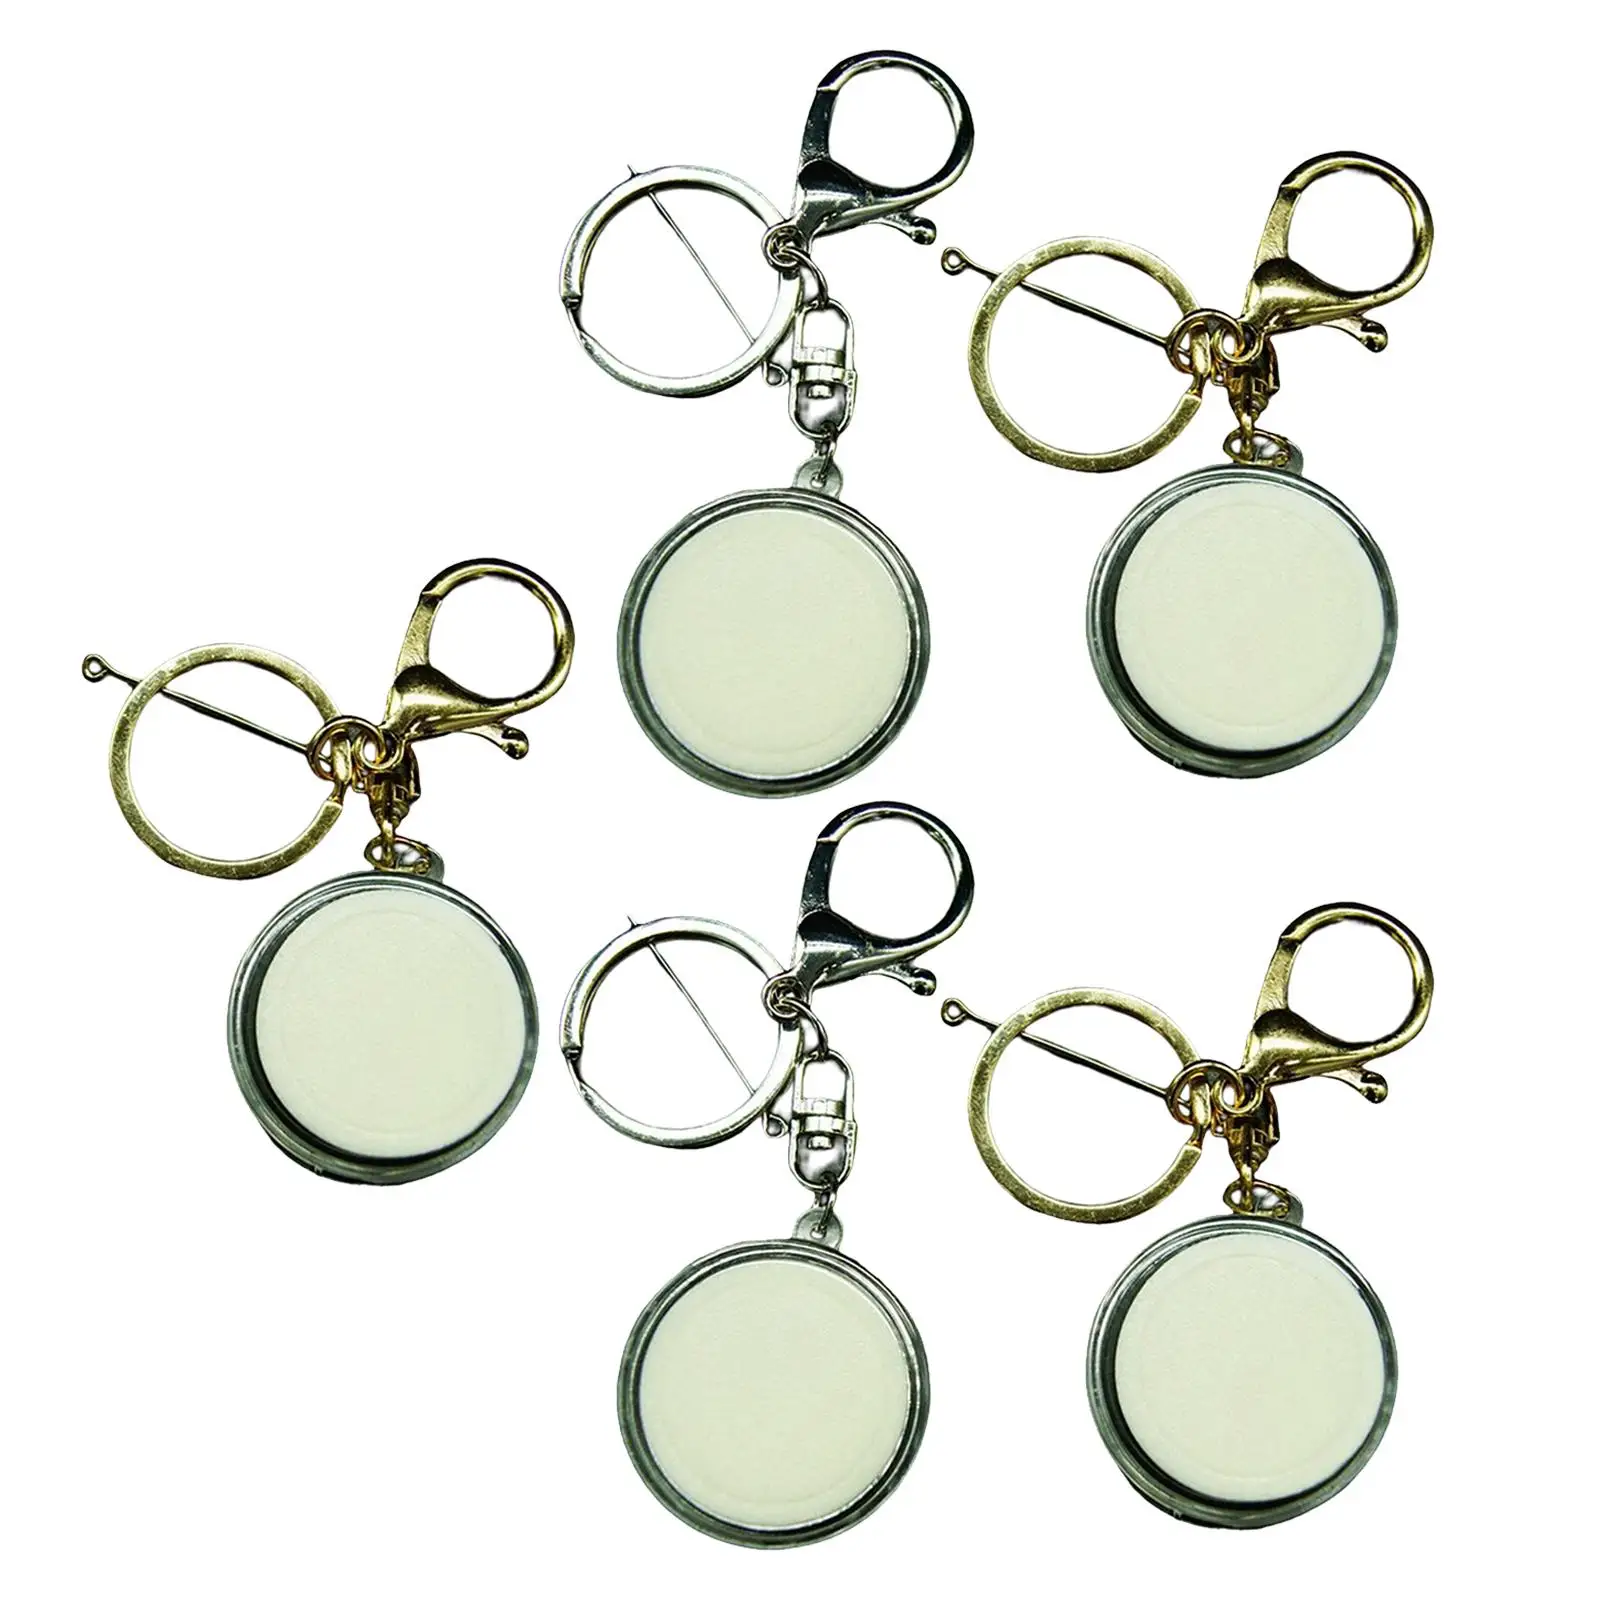 5 Pieces Souvenir Holder , Collection Chains 32mm Decor Ornaments for Room Purse Teachers Gifts